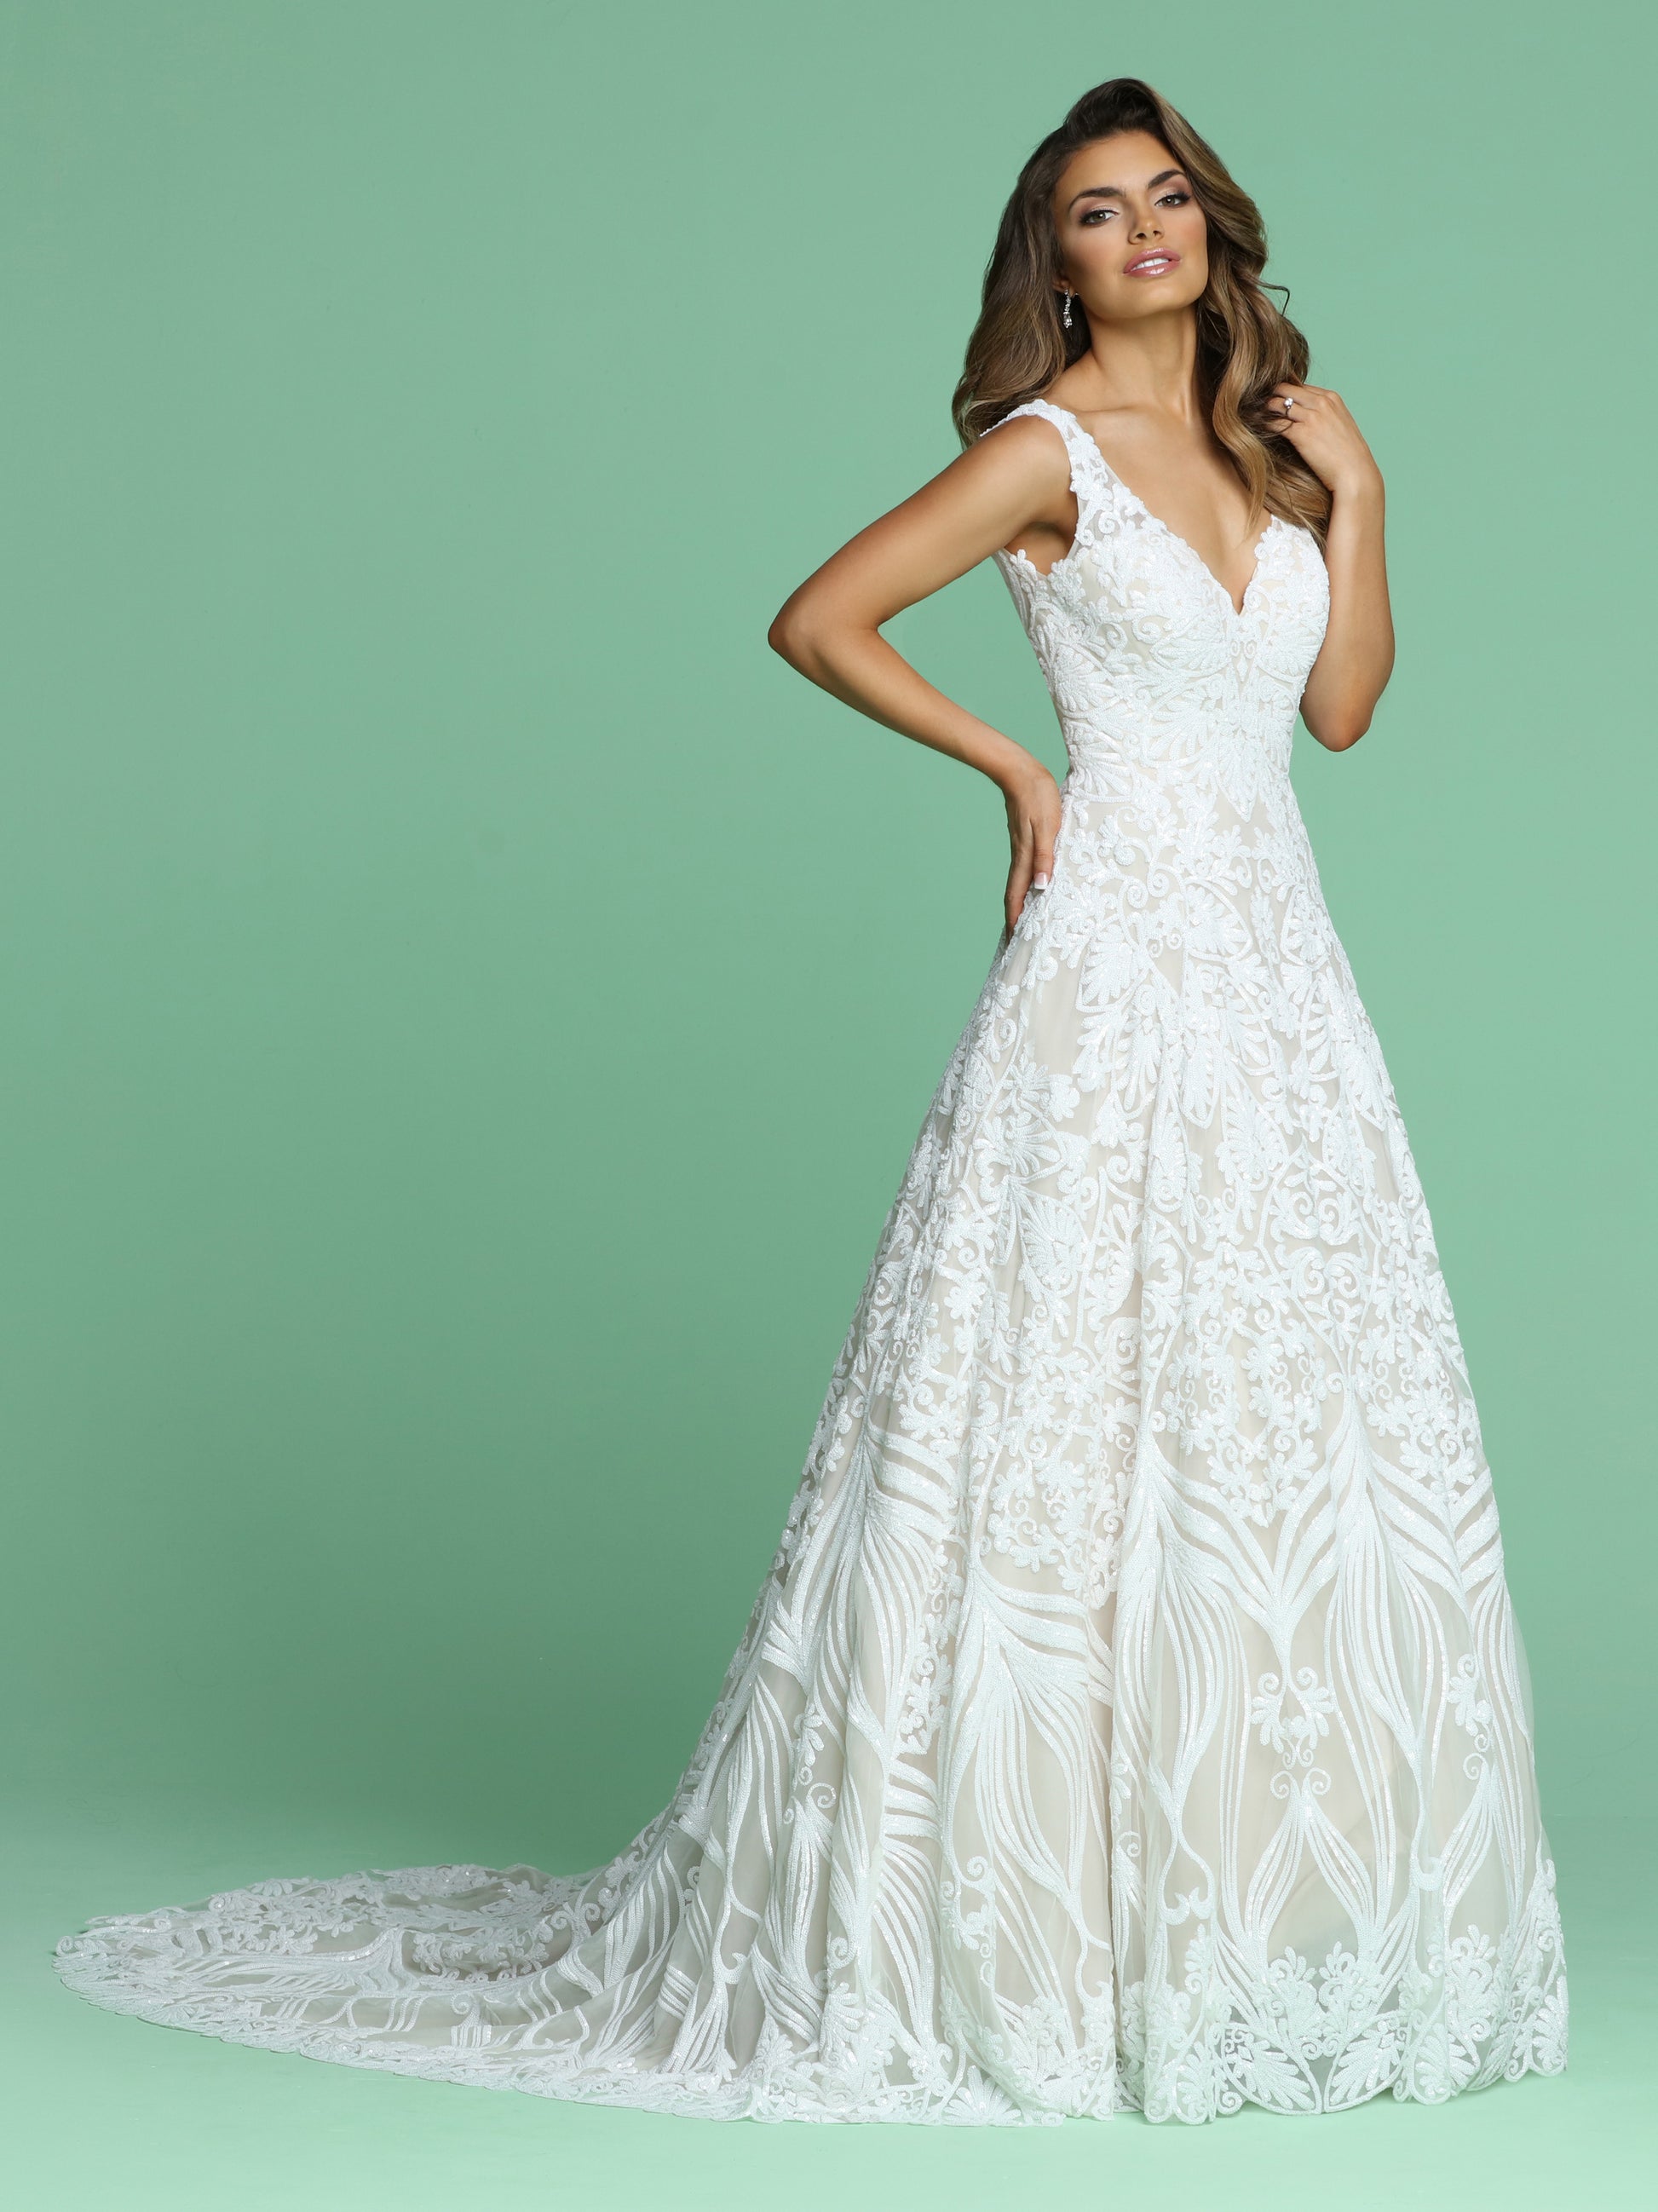 Davinci Bridal 50613 is a stunning long A Line Sequin Pattern Wedding Dress. Featuring a V Neckline with wide straps leading around to an open V back. This Shimmering gown is a true Fairytale Princess Gown!  Available for 1-2 Week Delivery!!!  Available Sizes: 2,4,6,8,10,12,14,16,18,20  Available Colors: Ivory/Blush, Ivory/Ivory  Available Sizes: 2-30  Available Colors: Ivory/Blush, Ivory/Ivory, White/White